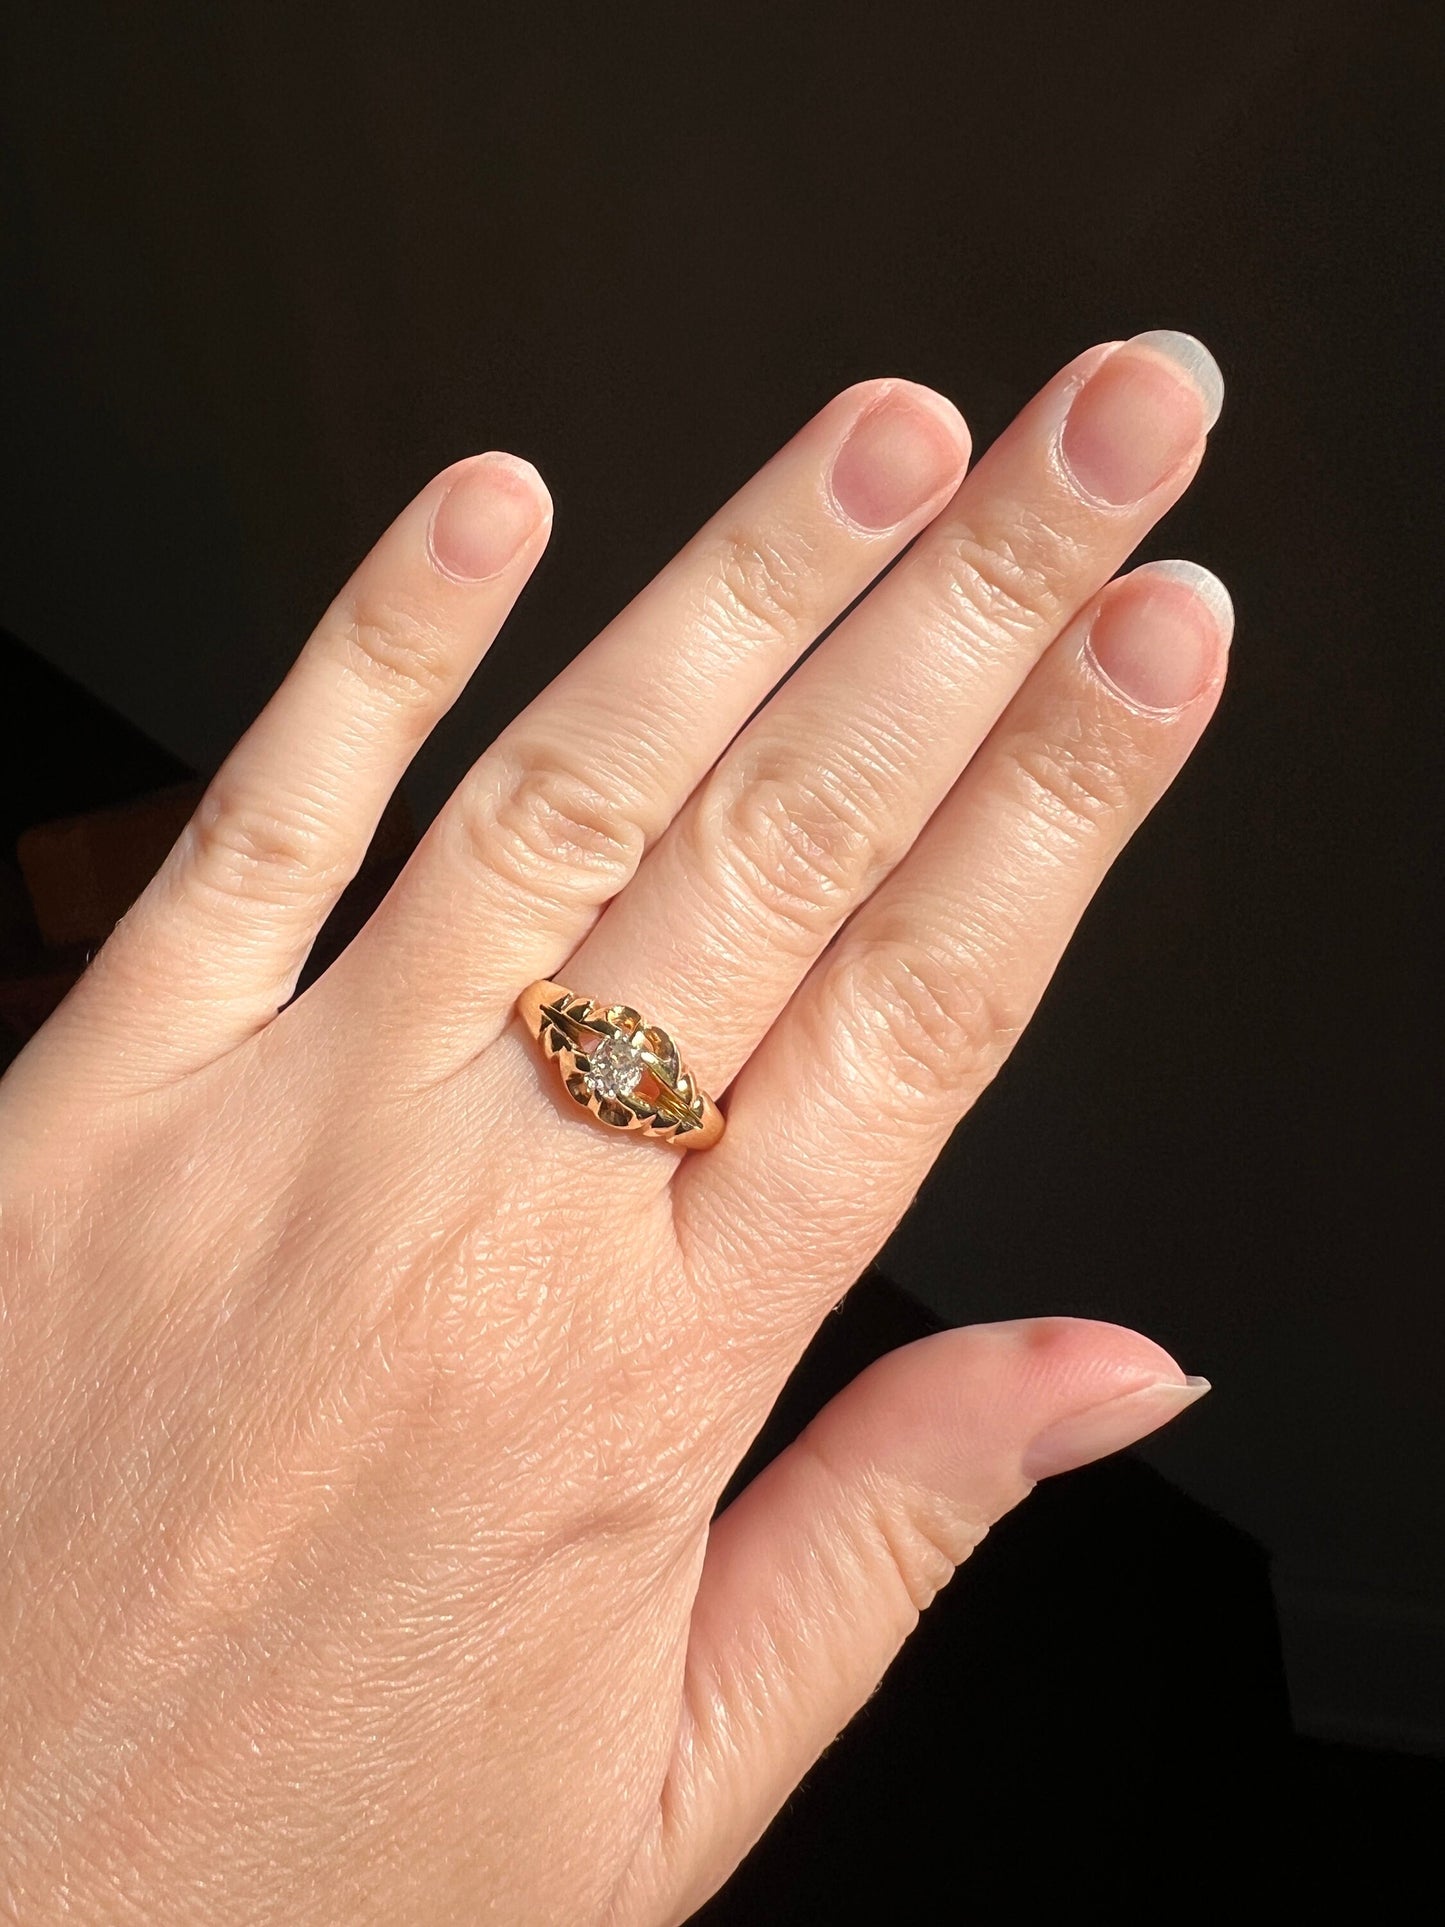 Unique Victorian ANTIQUE .5 Carat Gypsy Band Ring 18k Gold OVAL Old Mine Cut DIAMOND Buttercup Belcher Stacker Romantic Gift OmC Geometric